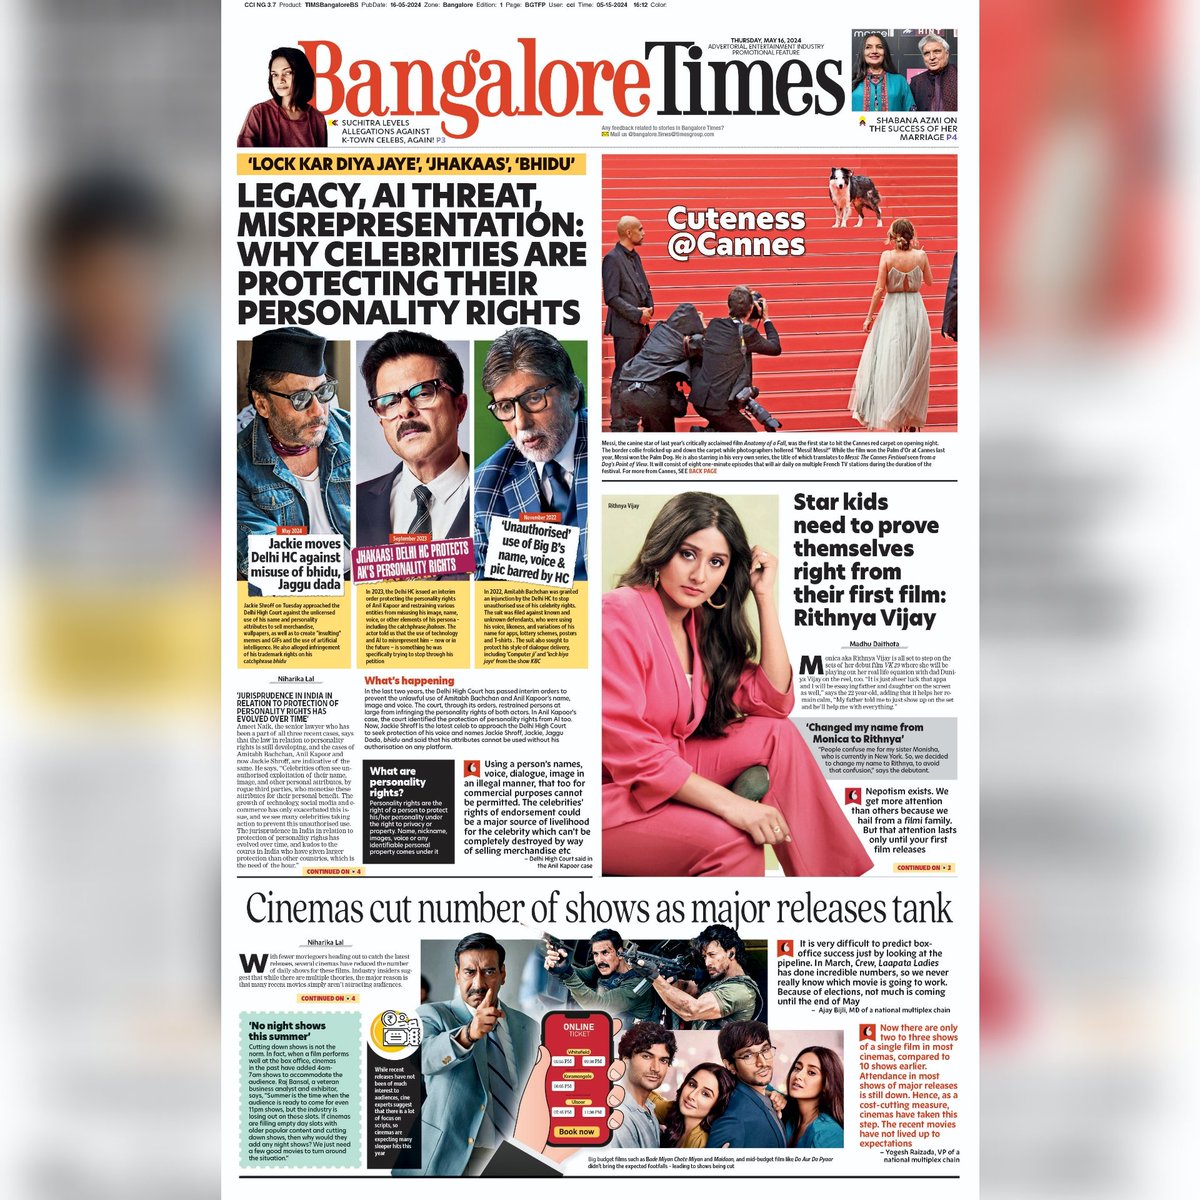 Good morning Bengaluru. Here's a peek at today's Bangalore Times. For more news, log on to etimes.in. Catch our e-paper at epaper.timesgroup.com